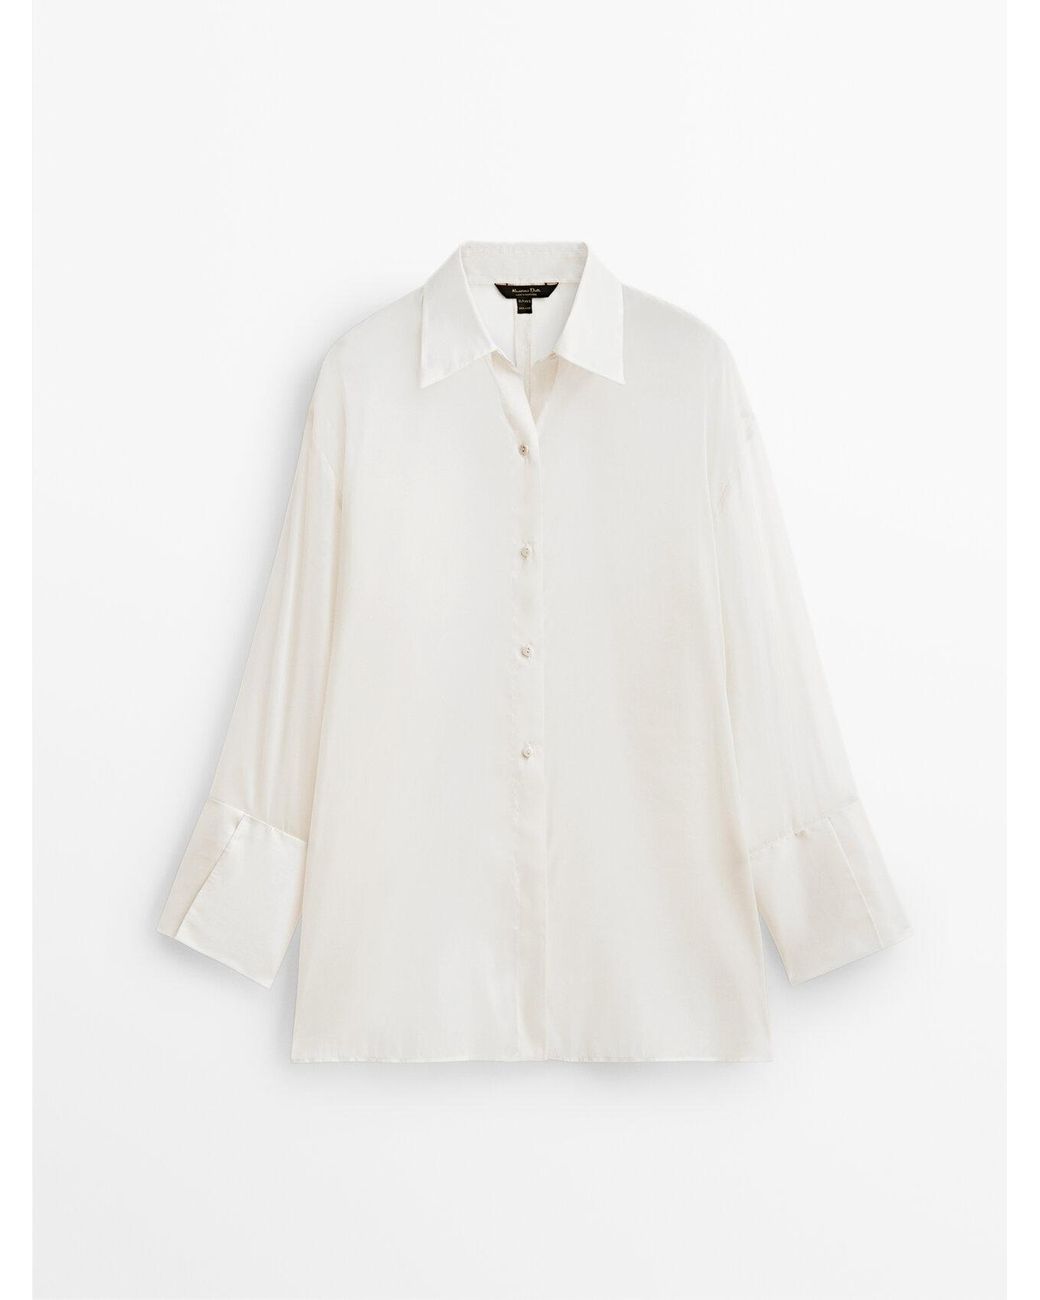 MASSIMO DUTTI Organza And Silk Oversize Blouse in White | Lyst